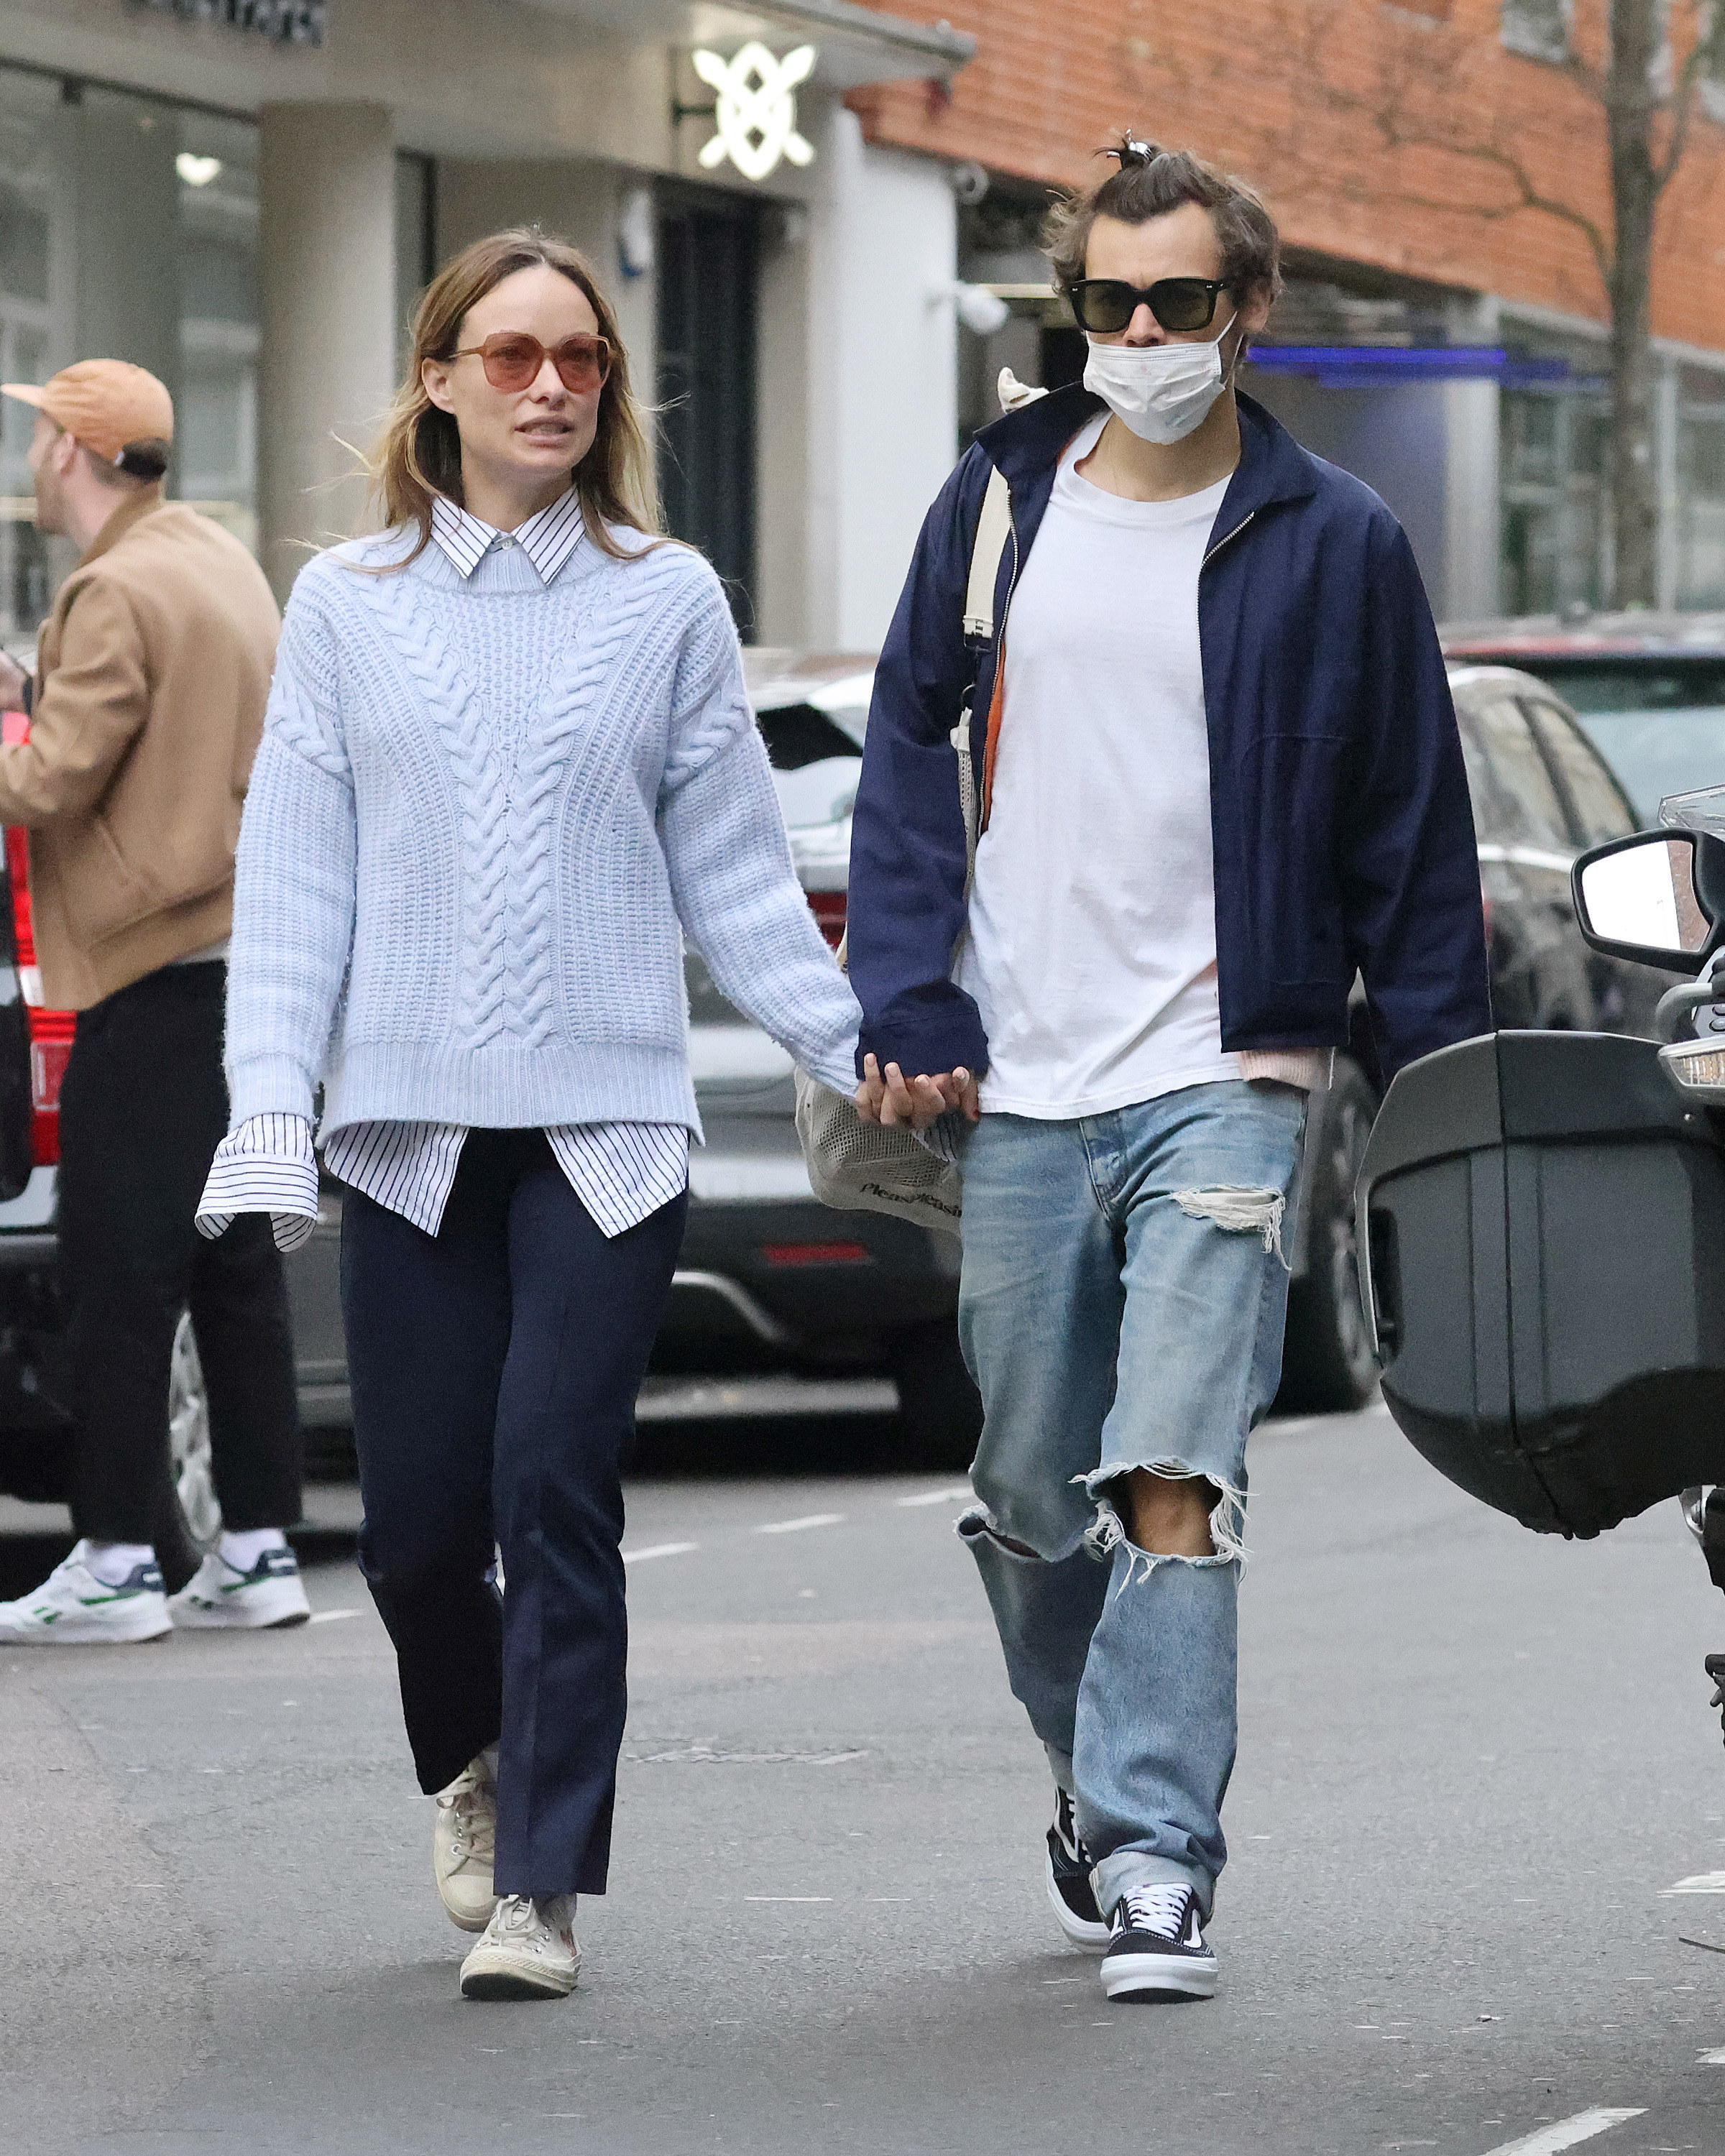 Olivia Wilde and Harry Styles walking down the street.